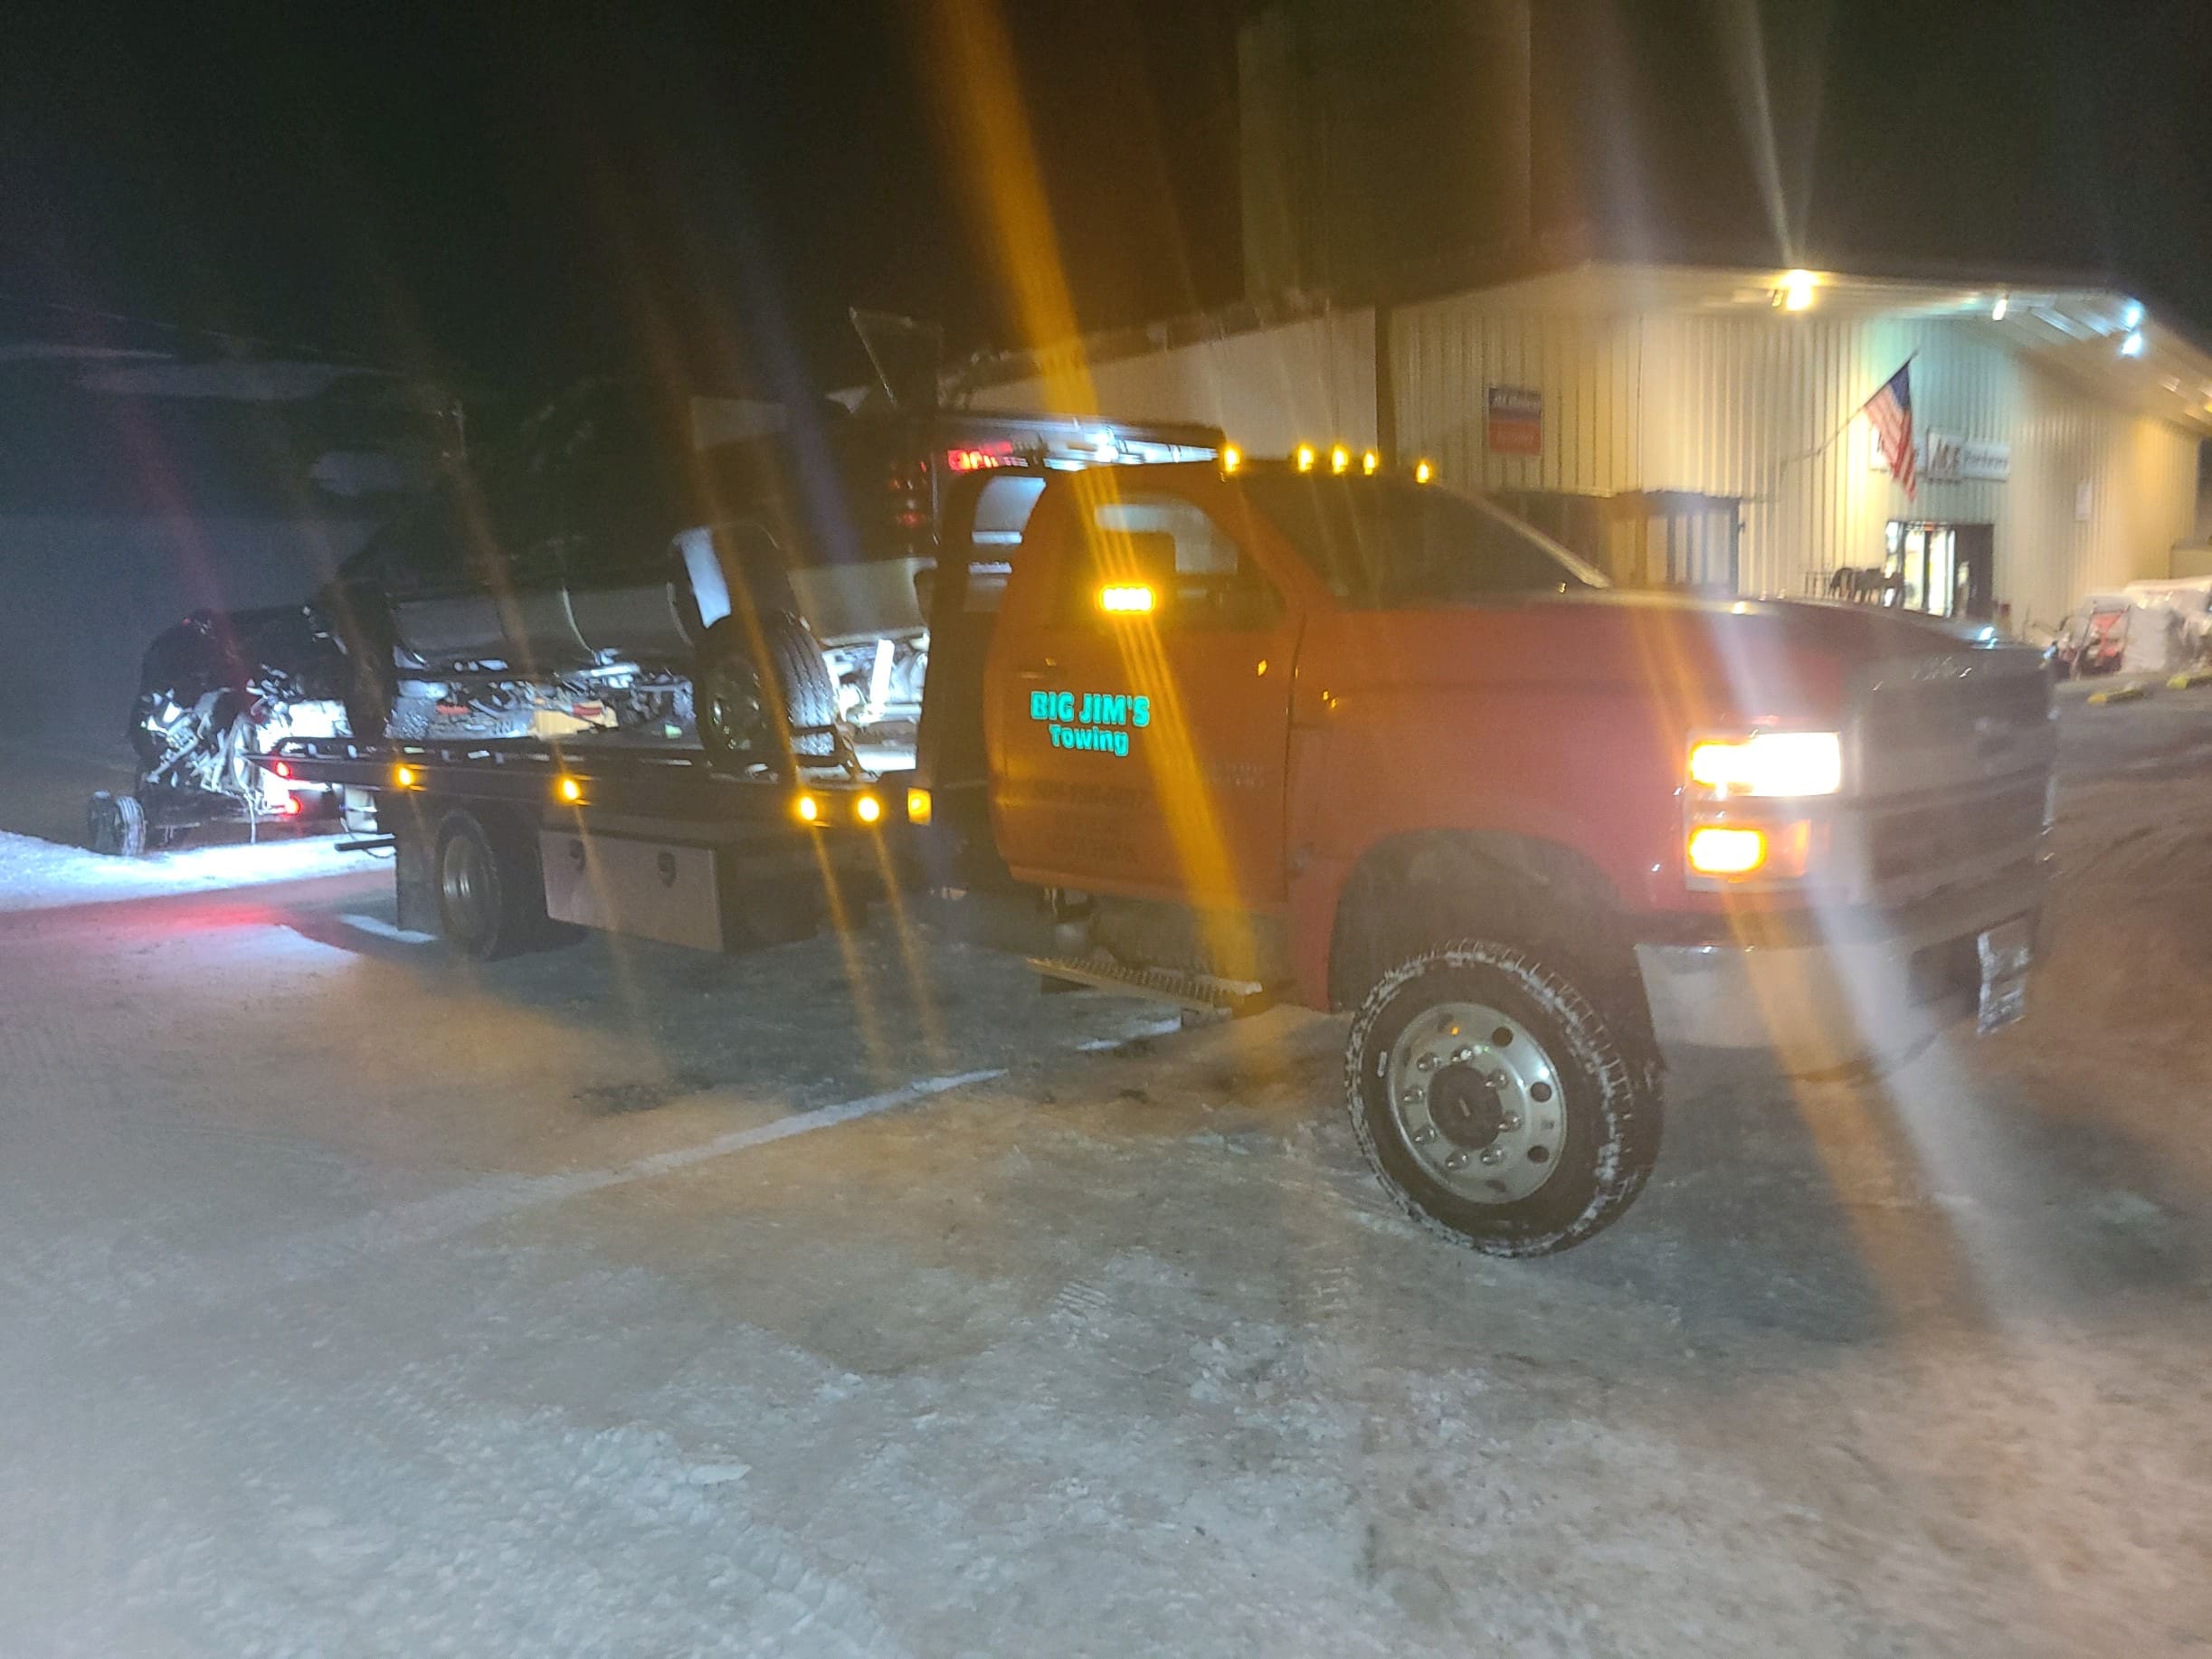 Big Jim's Flatbed Tow Truck at night